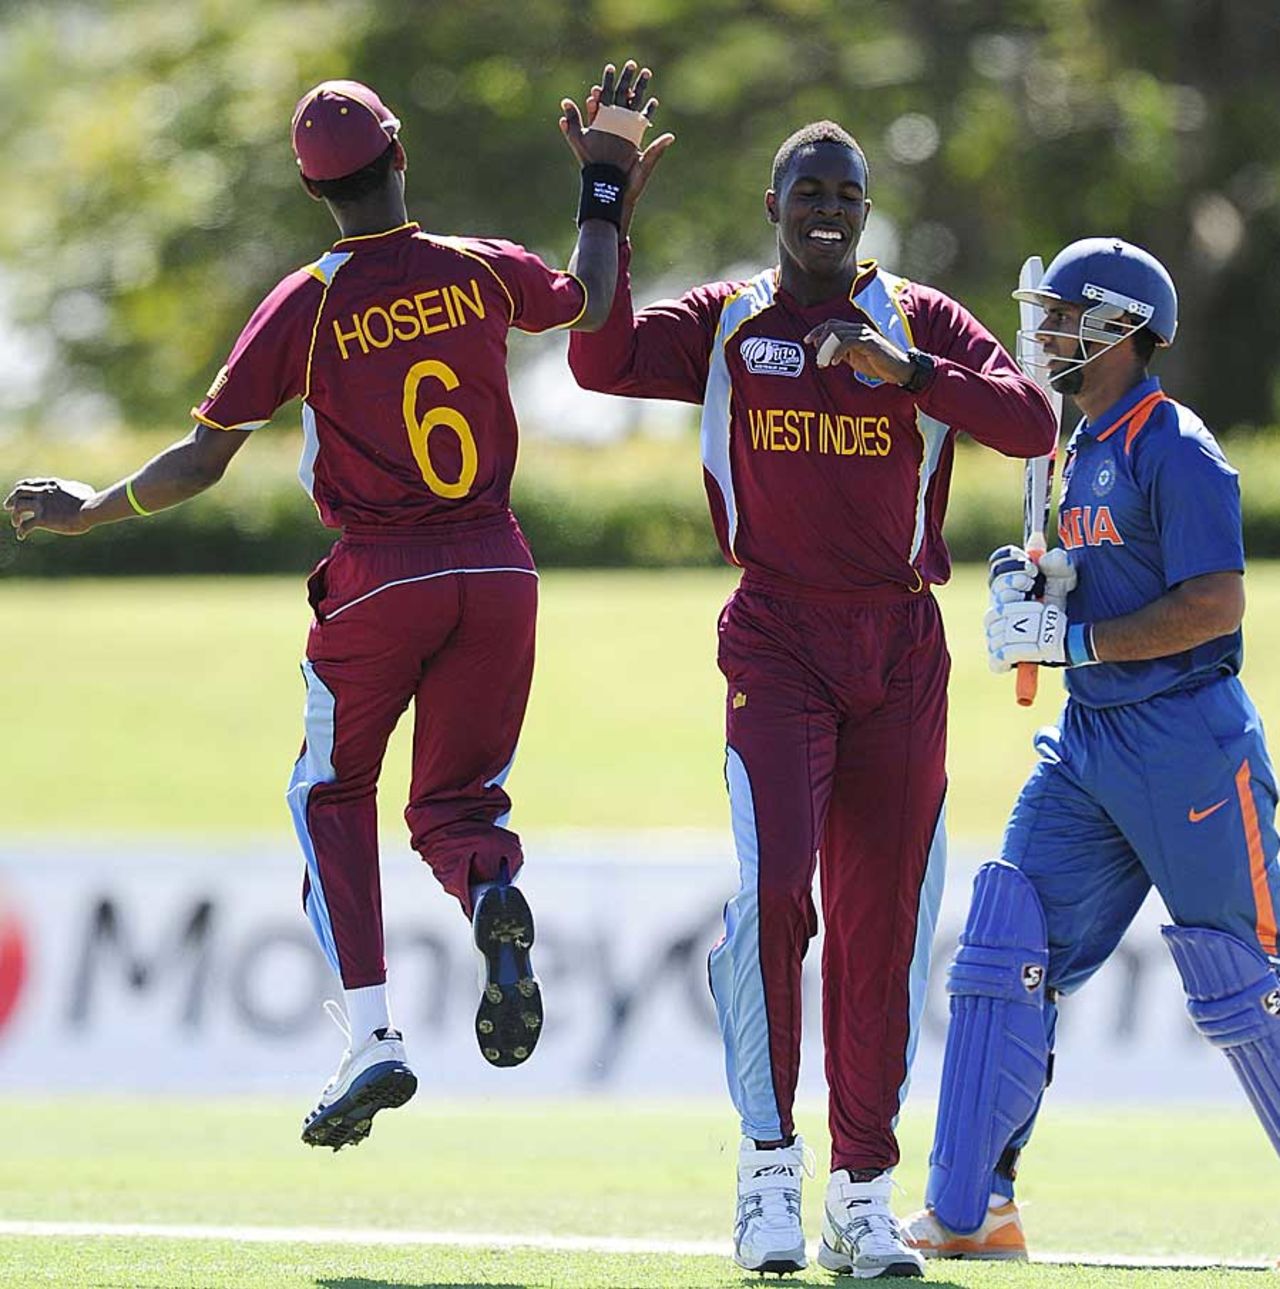 Jerome Jones picked up two wickets, India v West Indies, Group C, ICC Under-19 World Cup 2012, Townsville, August 12, 2012